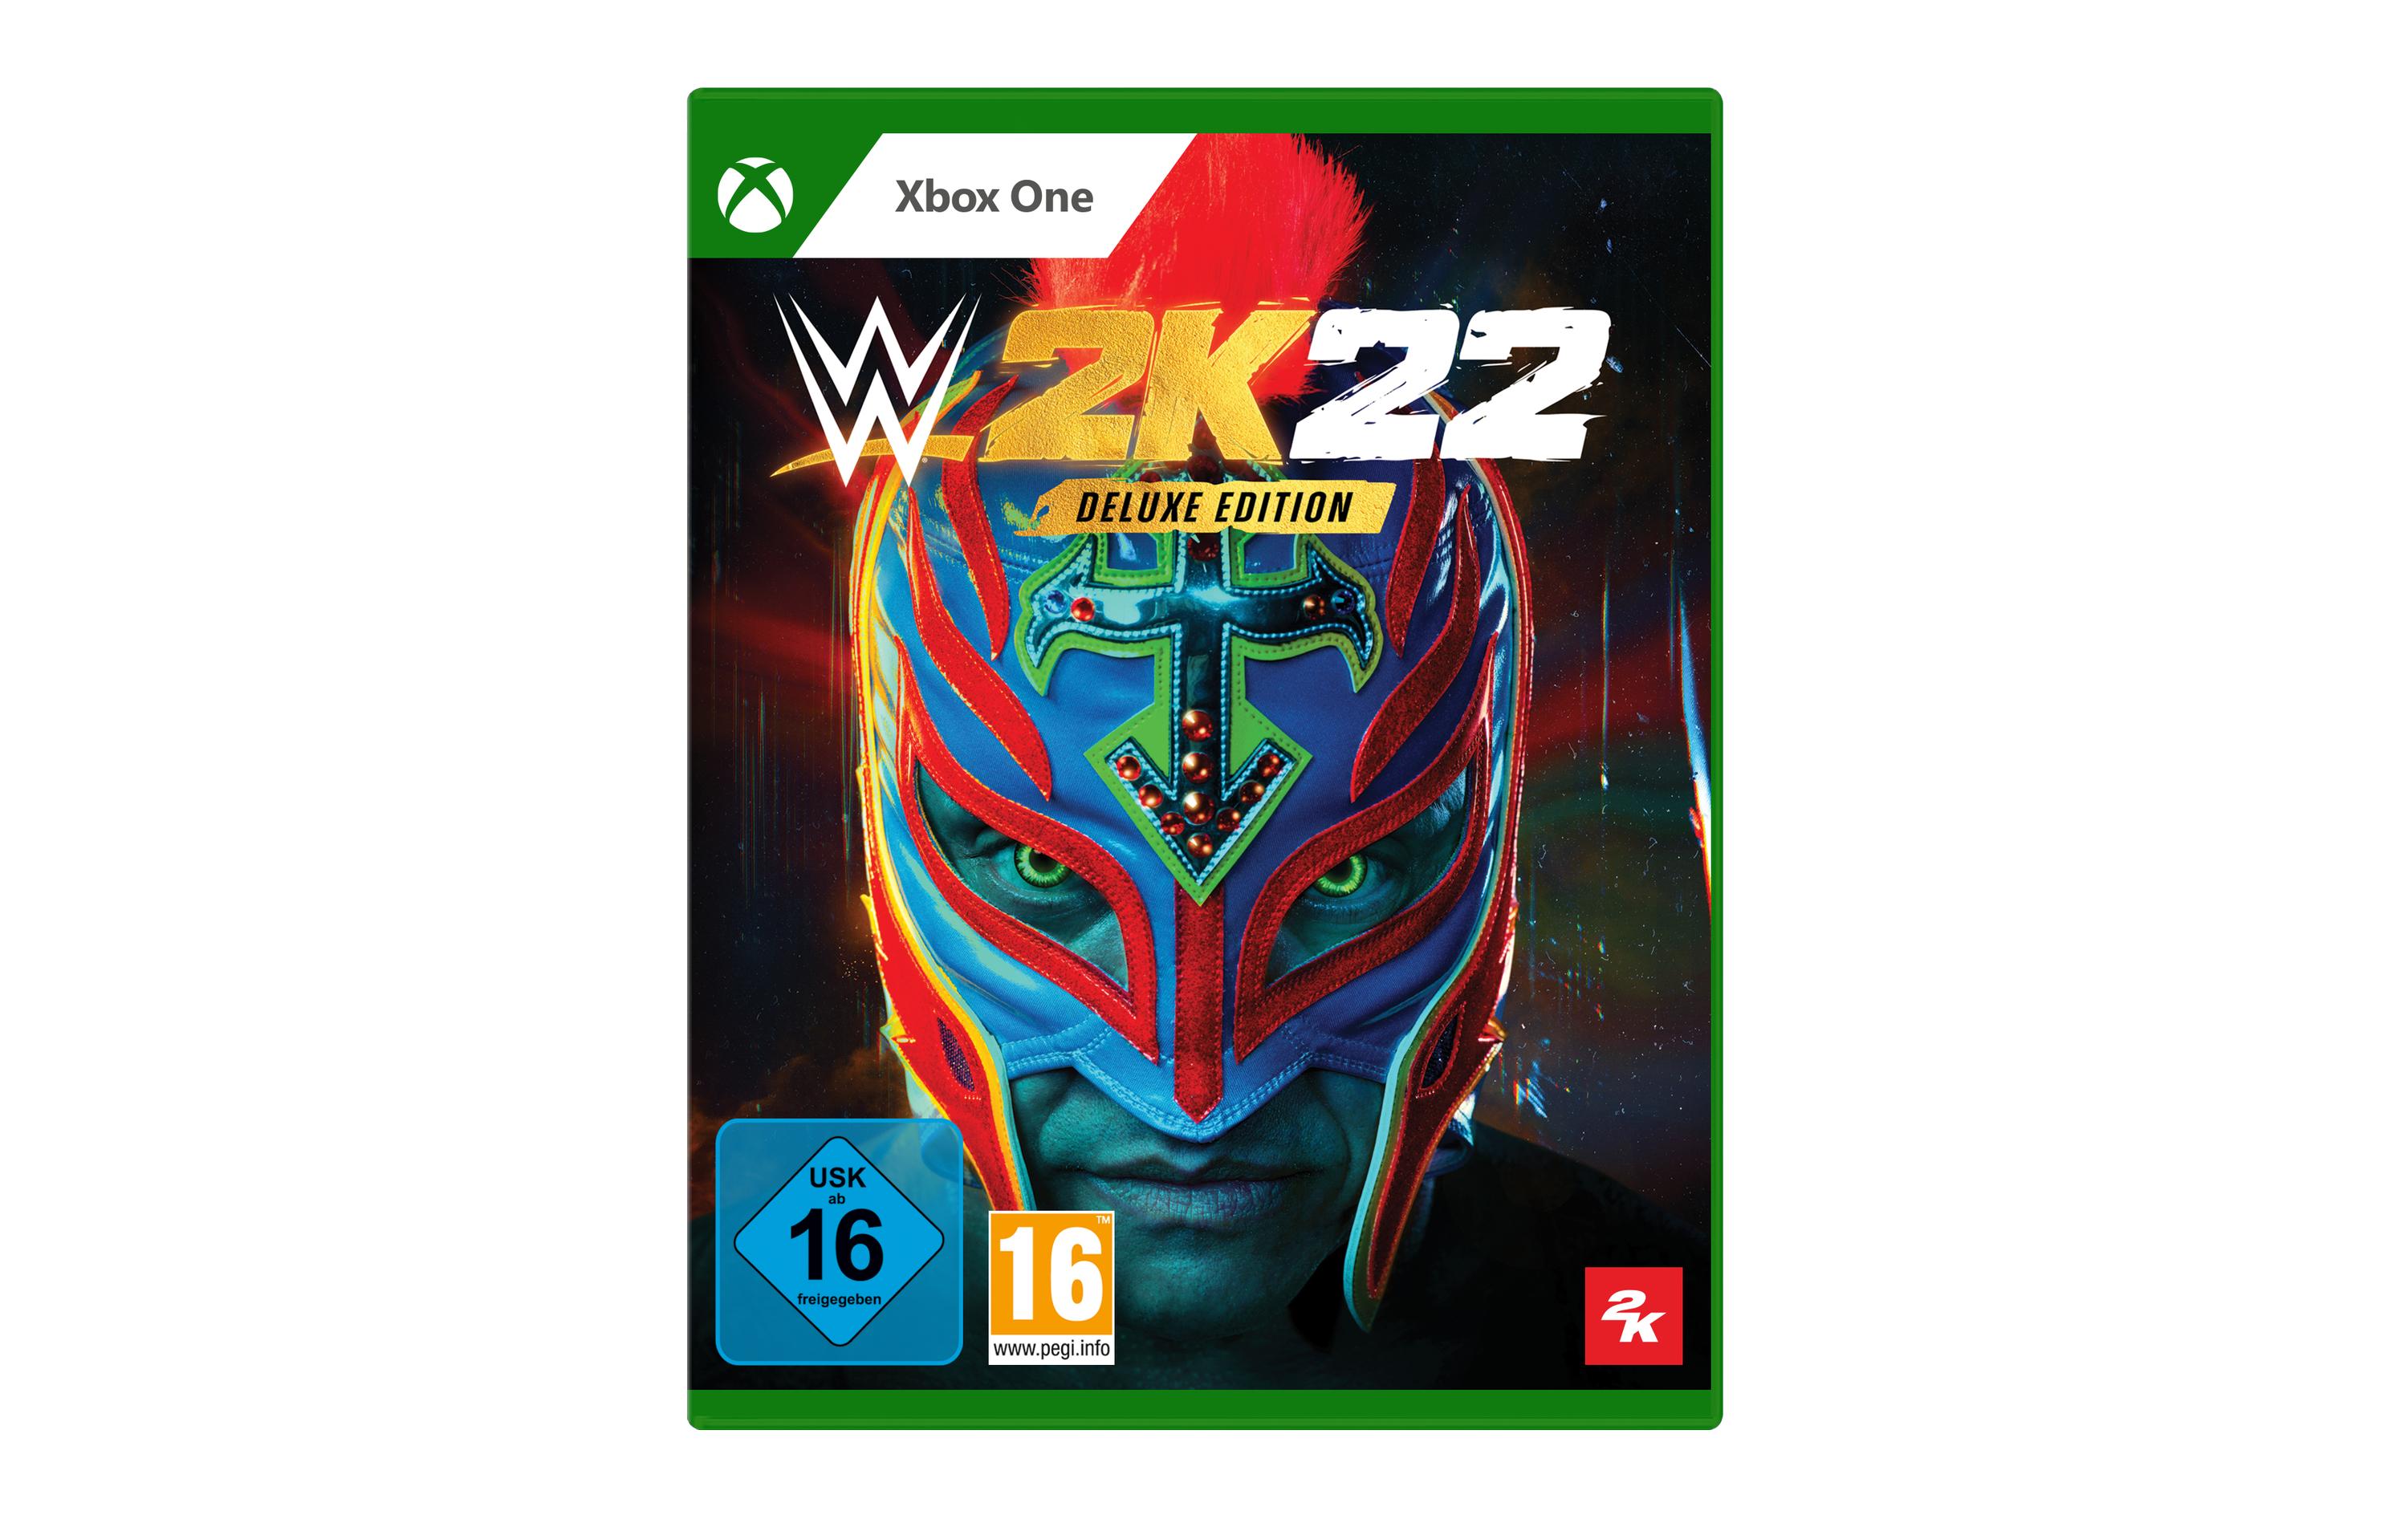 Take Two Spielesoftware »2K22 Deluxe Edition, Xbox«, Xbox One